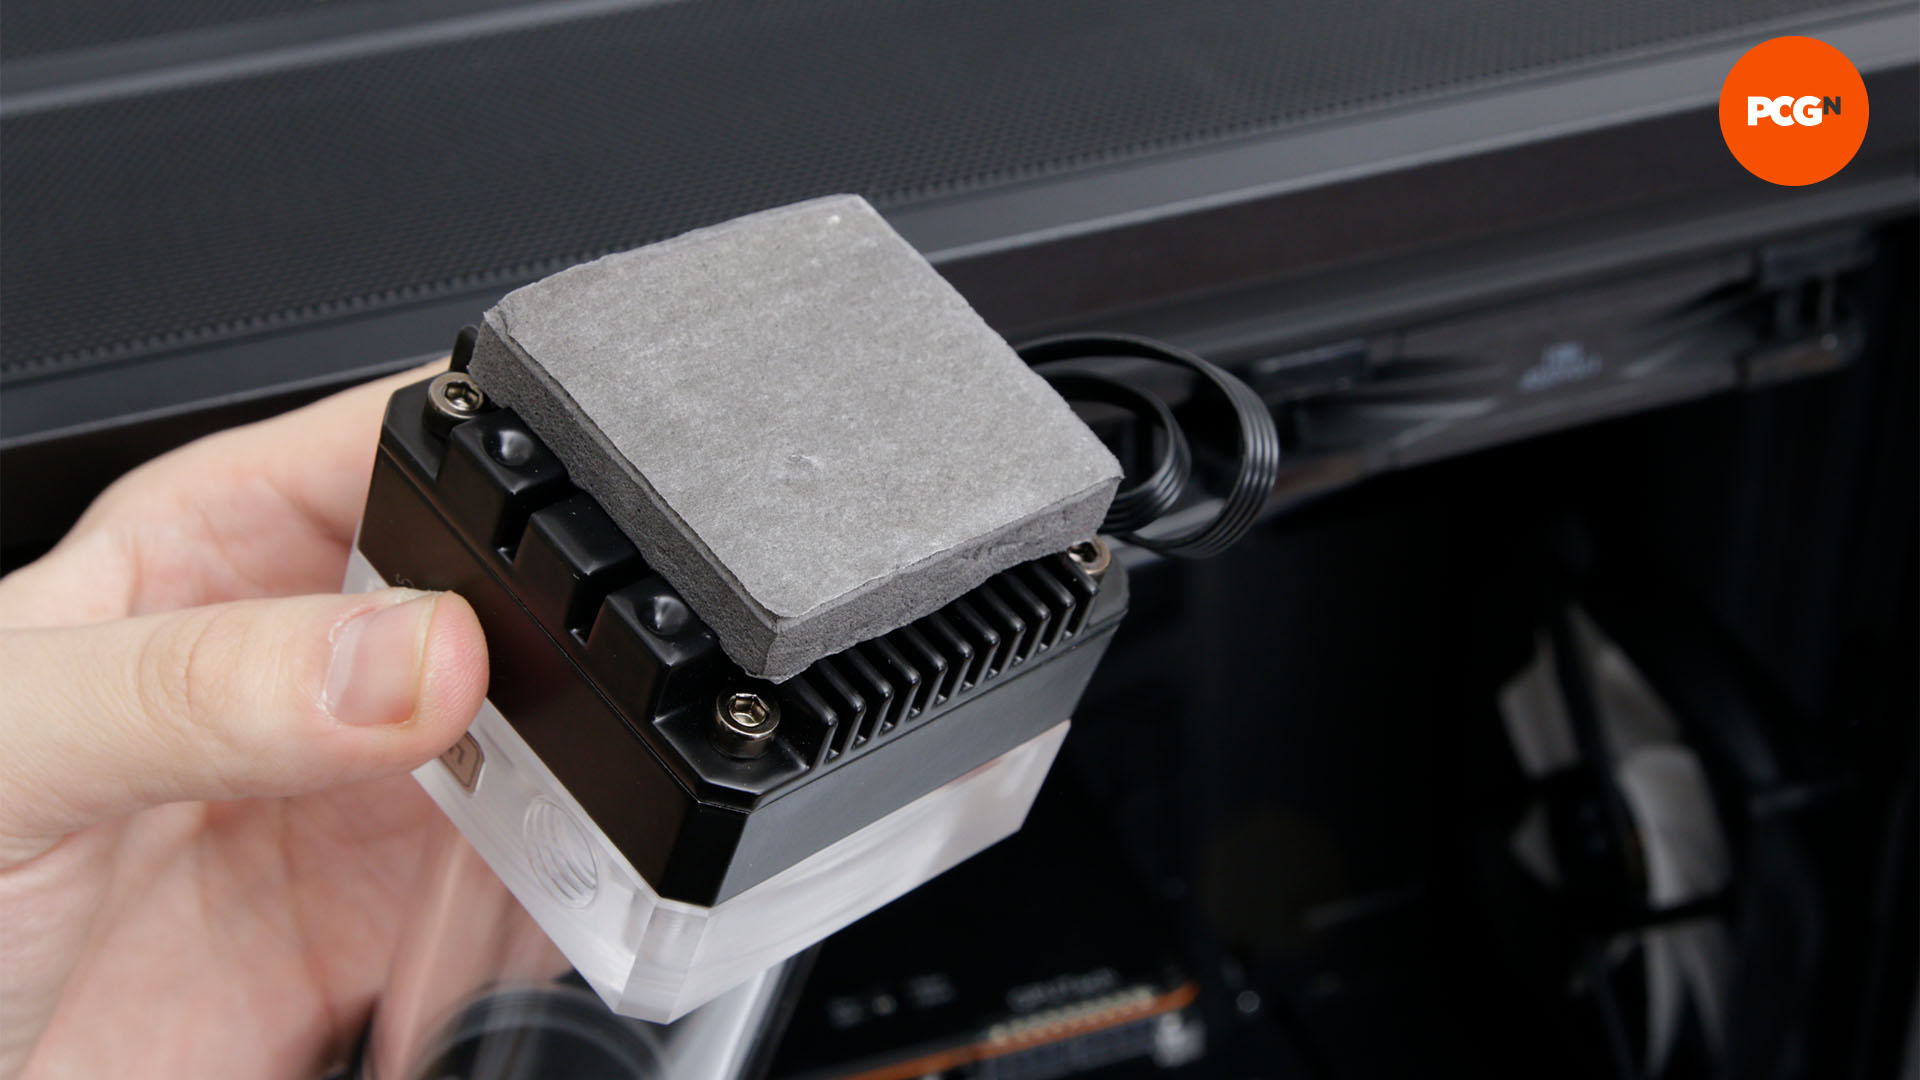 How to water cool your PC: Adhesive foam pad on reservoir